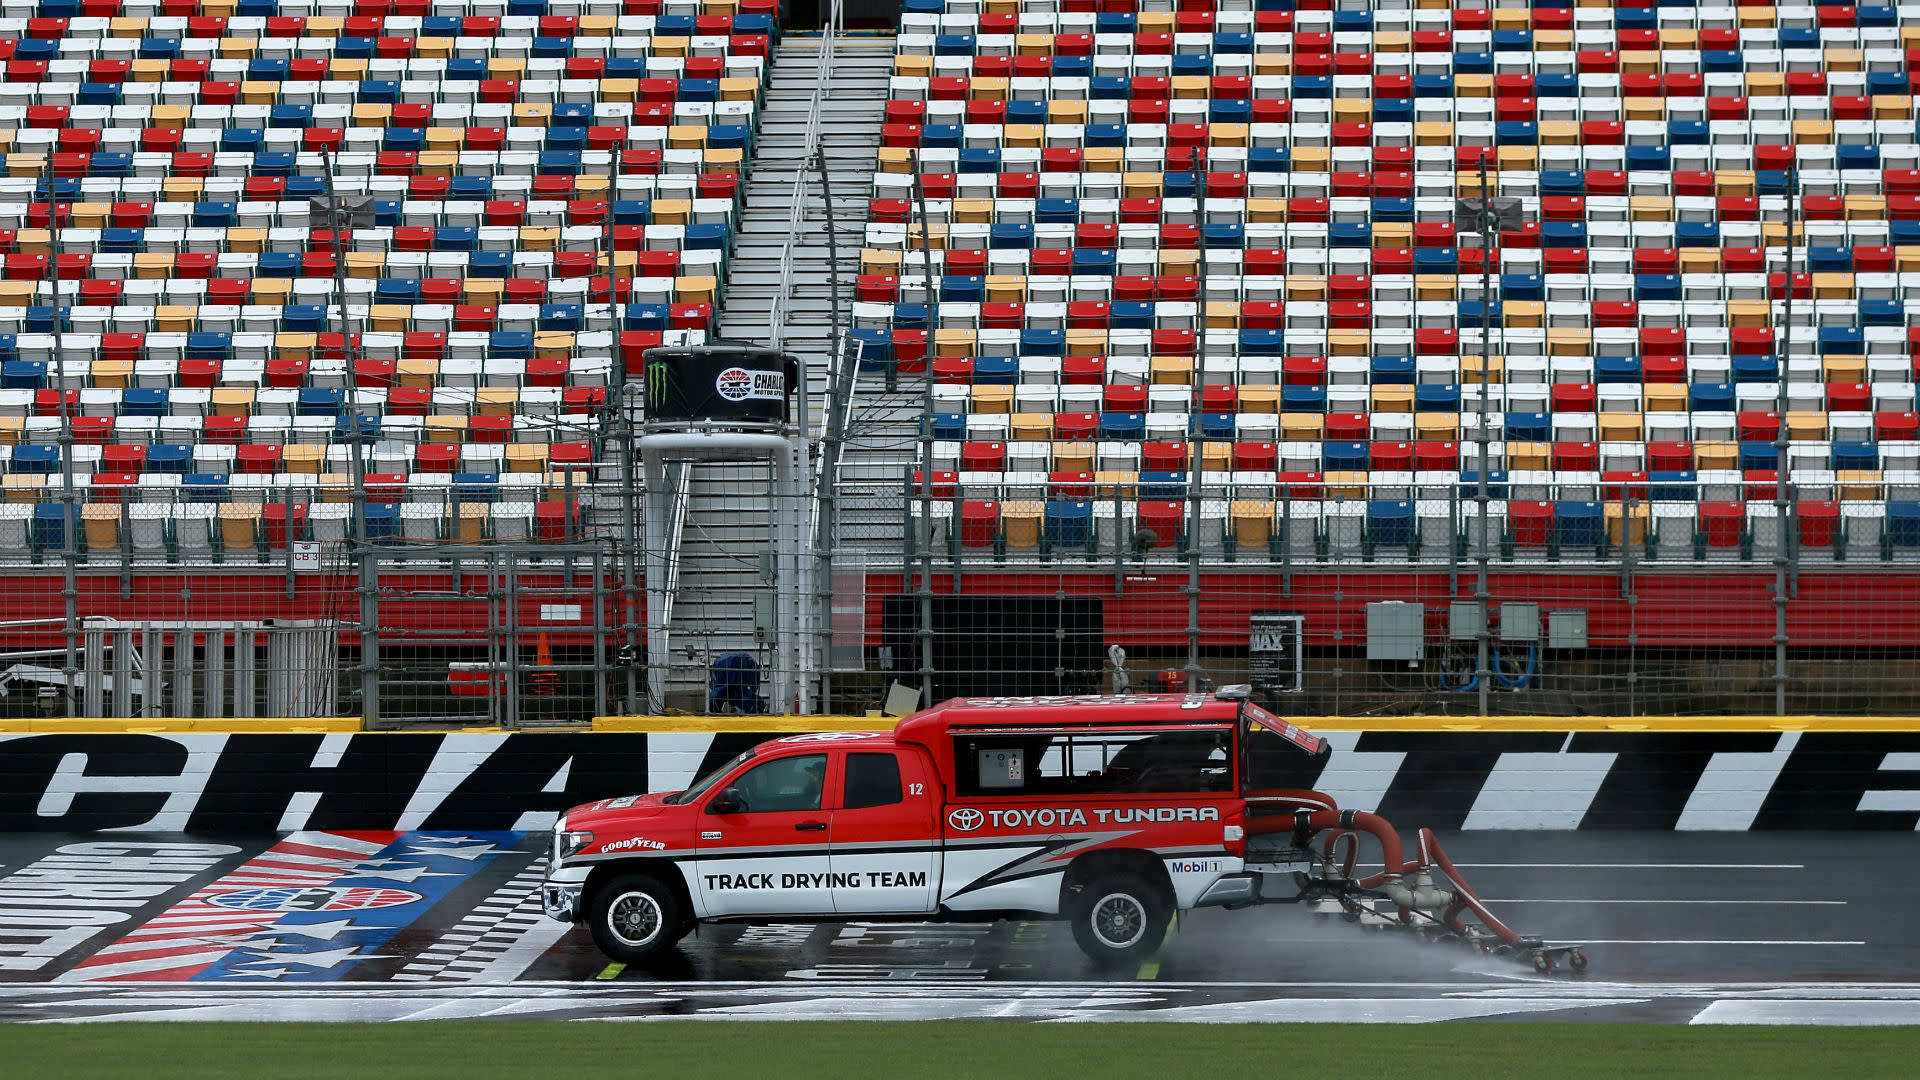 Nascar Race Weather Will Rain In Charlotte Forecast Delay Wednesday S Cup Race